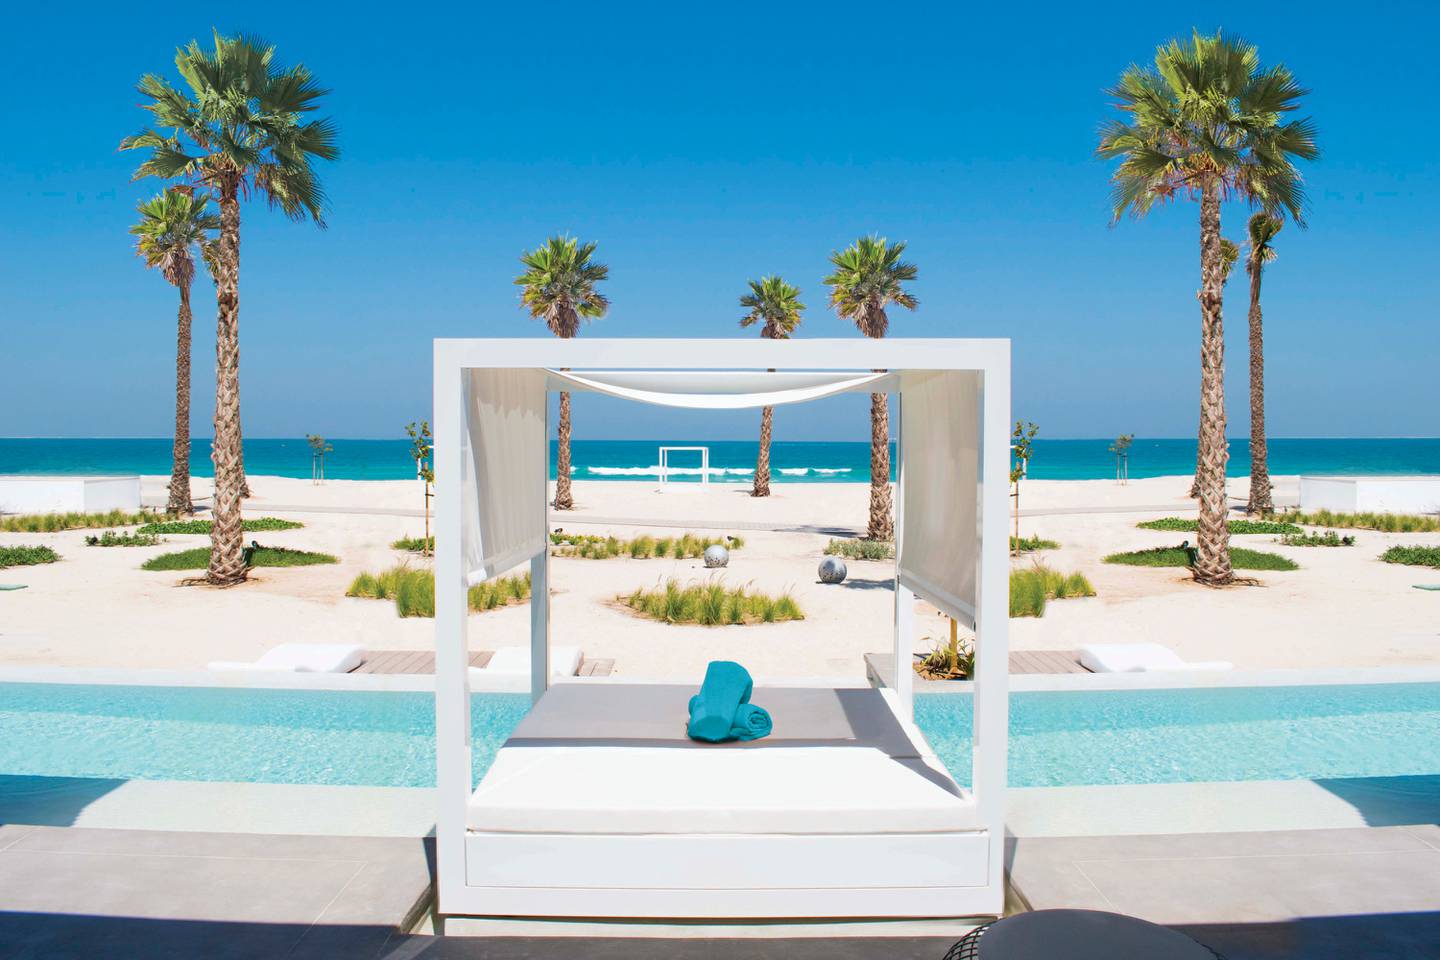 Nikki Beach Dubai. The brand will open a resort synonymous with its sophisticated beach club concept in Oman next year. Photo: GHA Properties